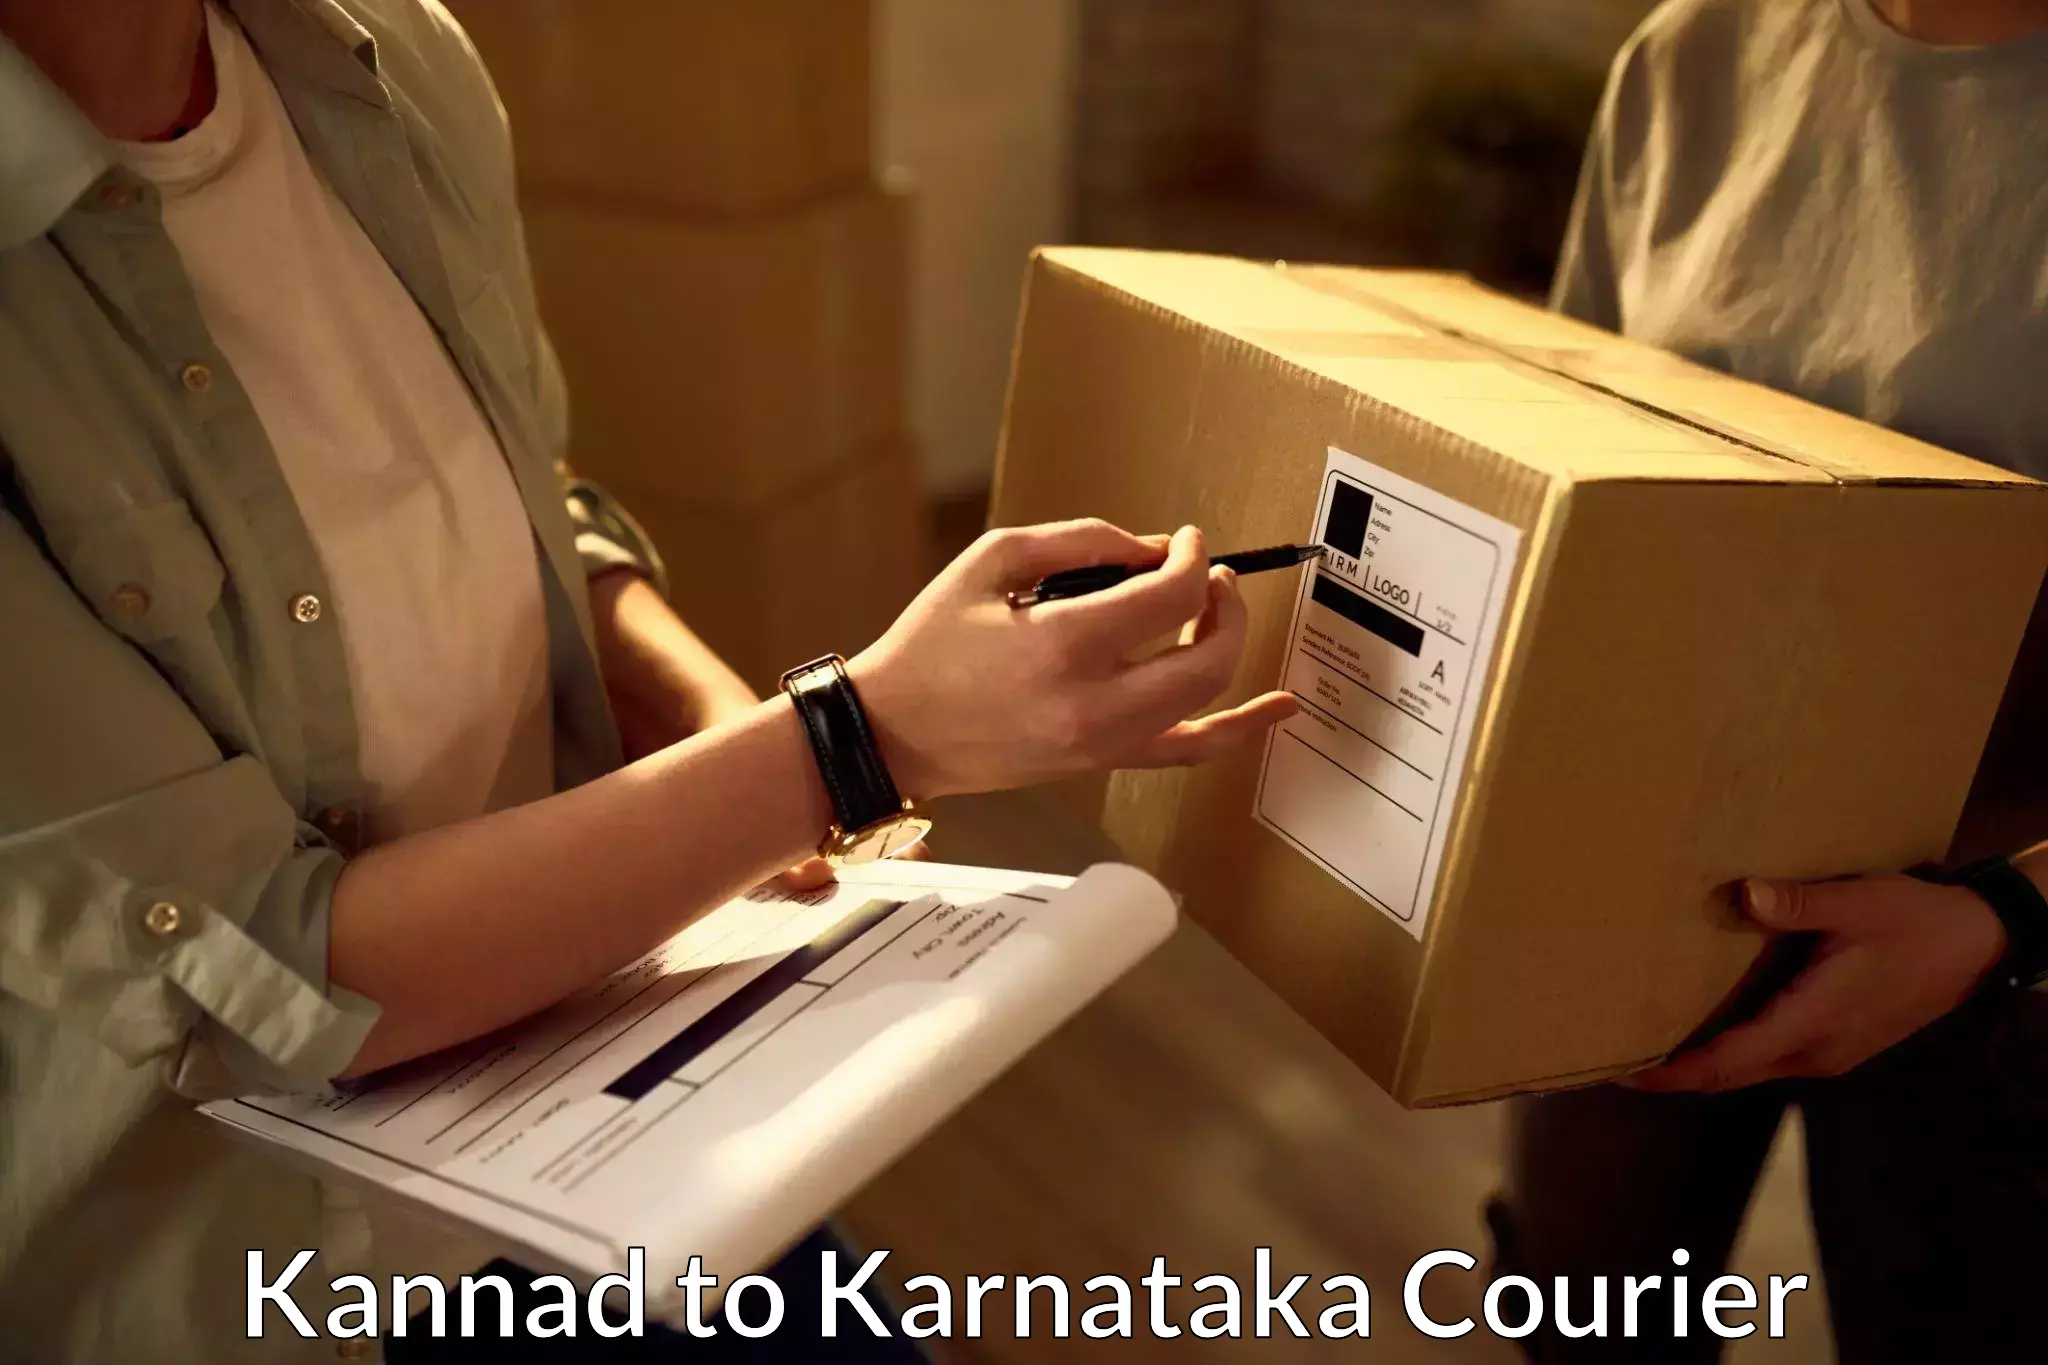 Remote area delivery in Kannad to Bengaluru